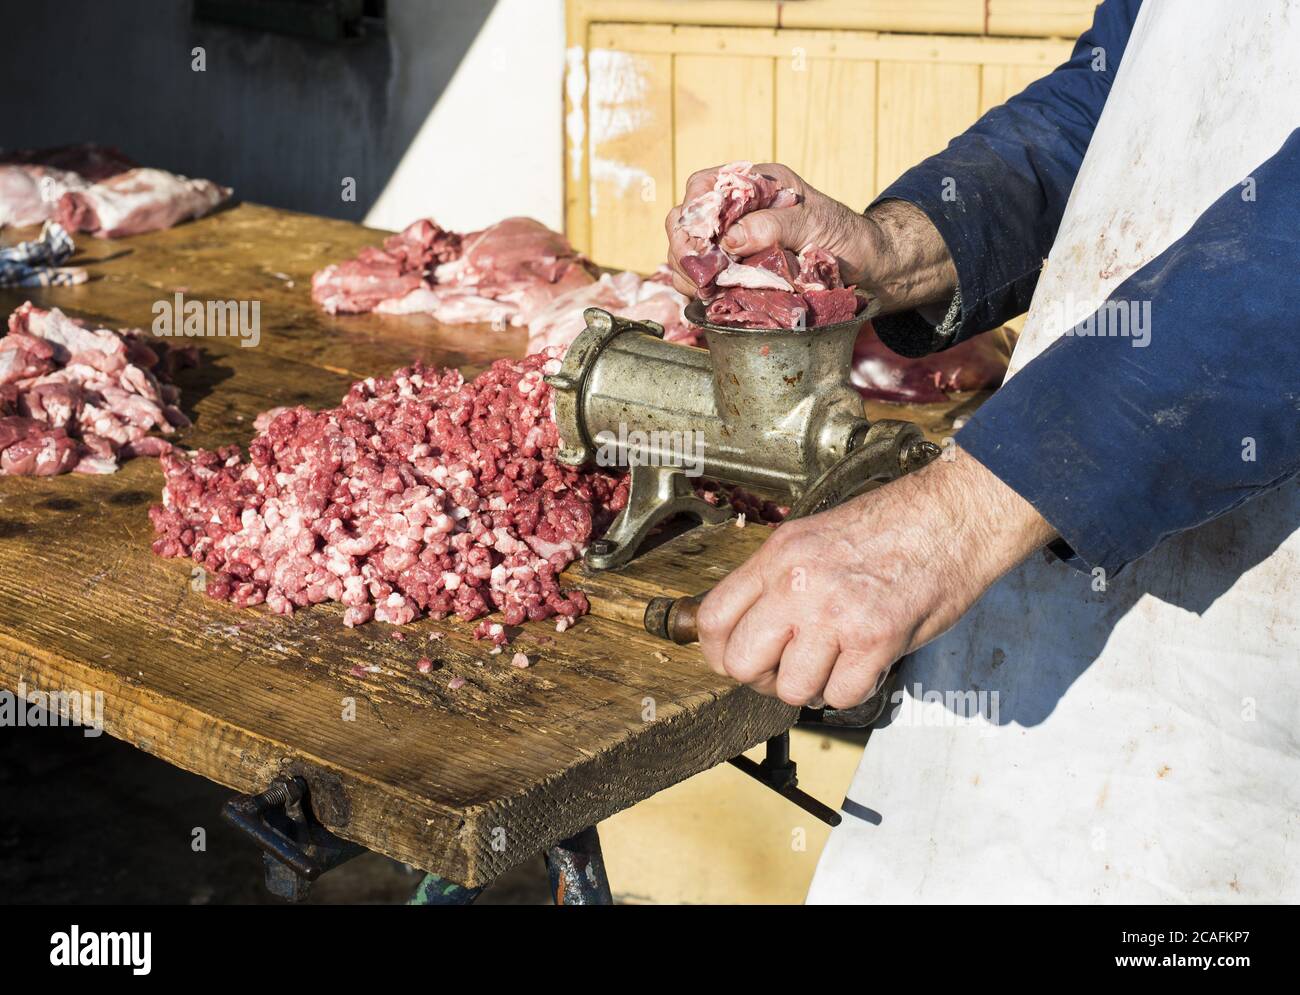 Close up shot of person grinding meat on a meat grinder Stock Photo - Alamy